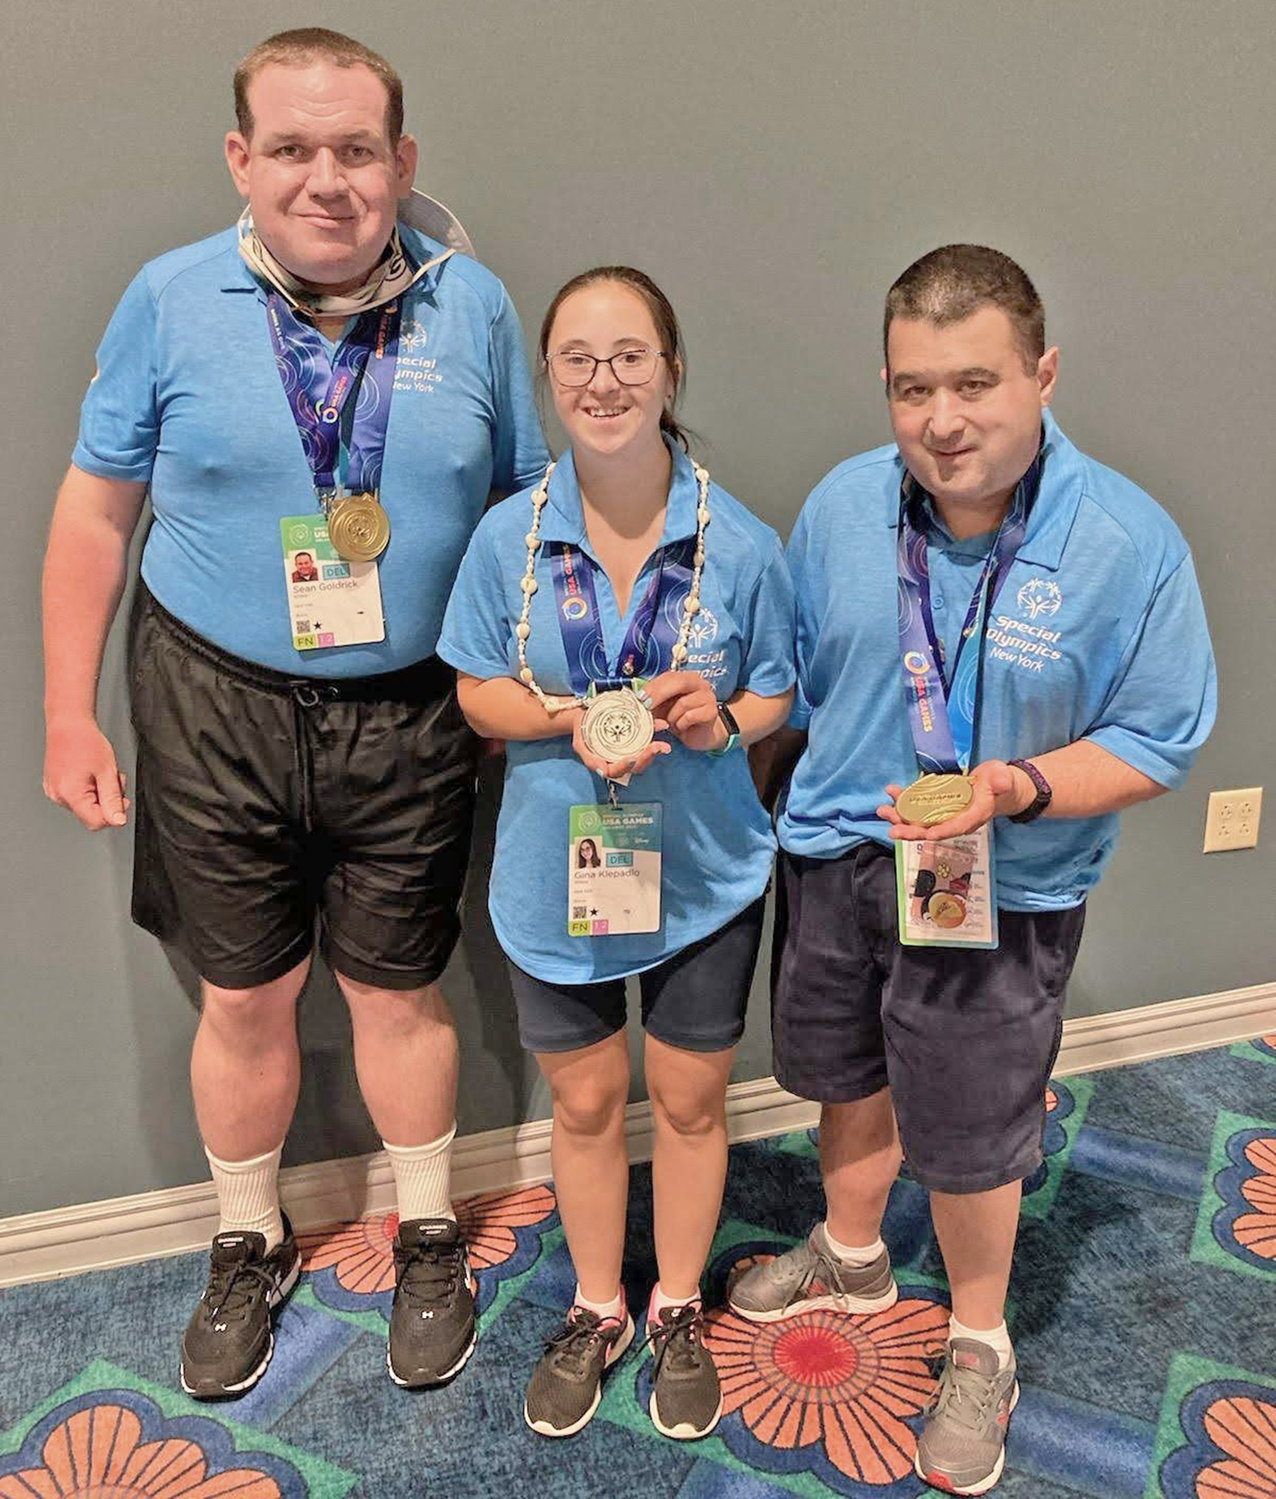 Three of the 12 bocce players representing New York state in the Special Olympics USA Games were from Oneida County. From left: Sean Goldrick of New Hartford and Gina Klepadlo and Paul Amoroso, both of Rome. Each came home from the event in Florida earlier this month with at least two medals, and all three won gold.